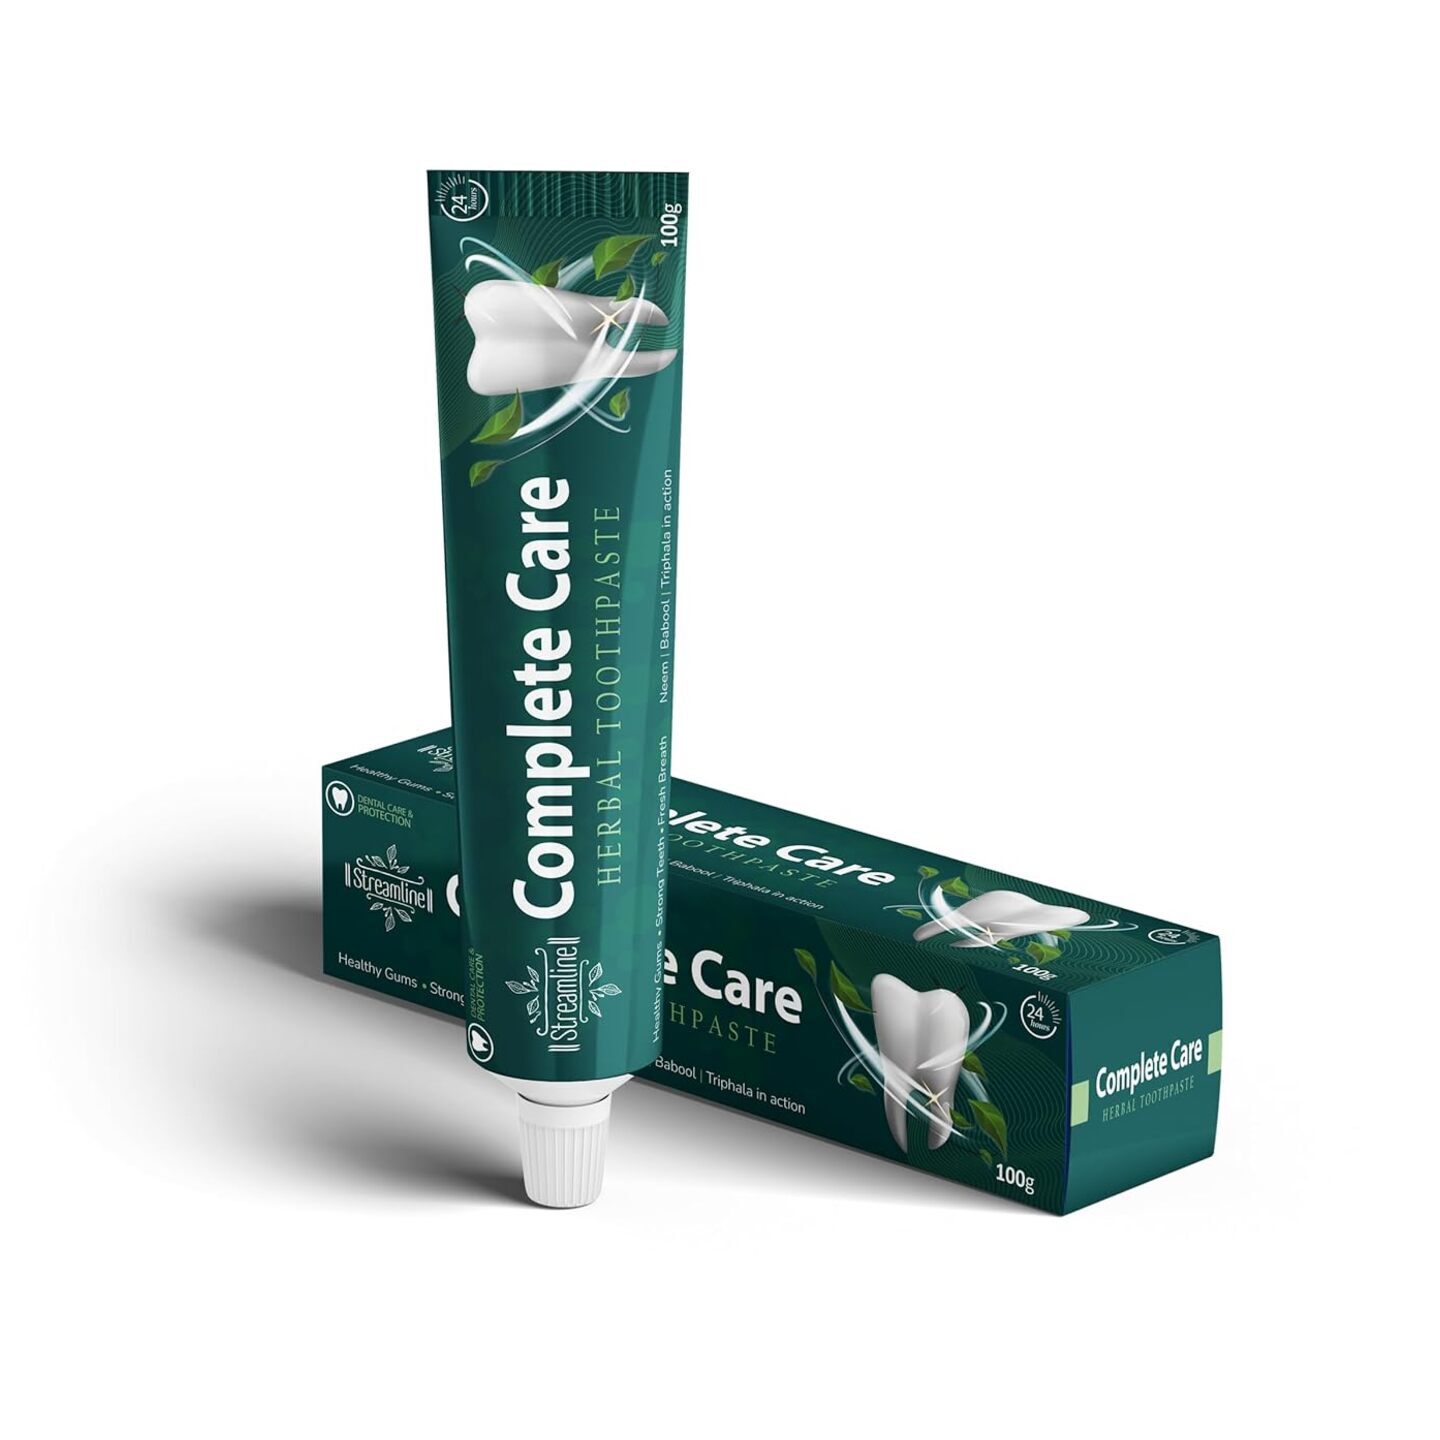 Streamline Complete Care Toothpaste With Goodness Of 33 Ayurvedic Herbs  Prevents & Calms Gum Pain  Kills Germs  Complete Family Toothpaste  No Added Flourides & Parabens